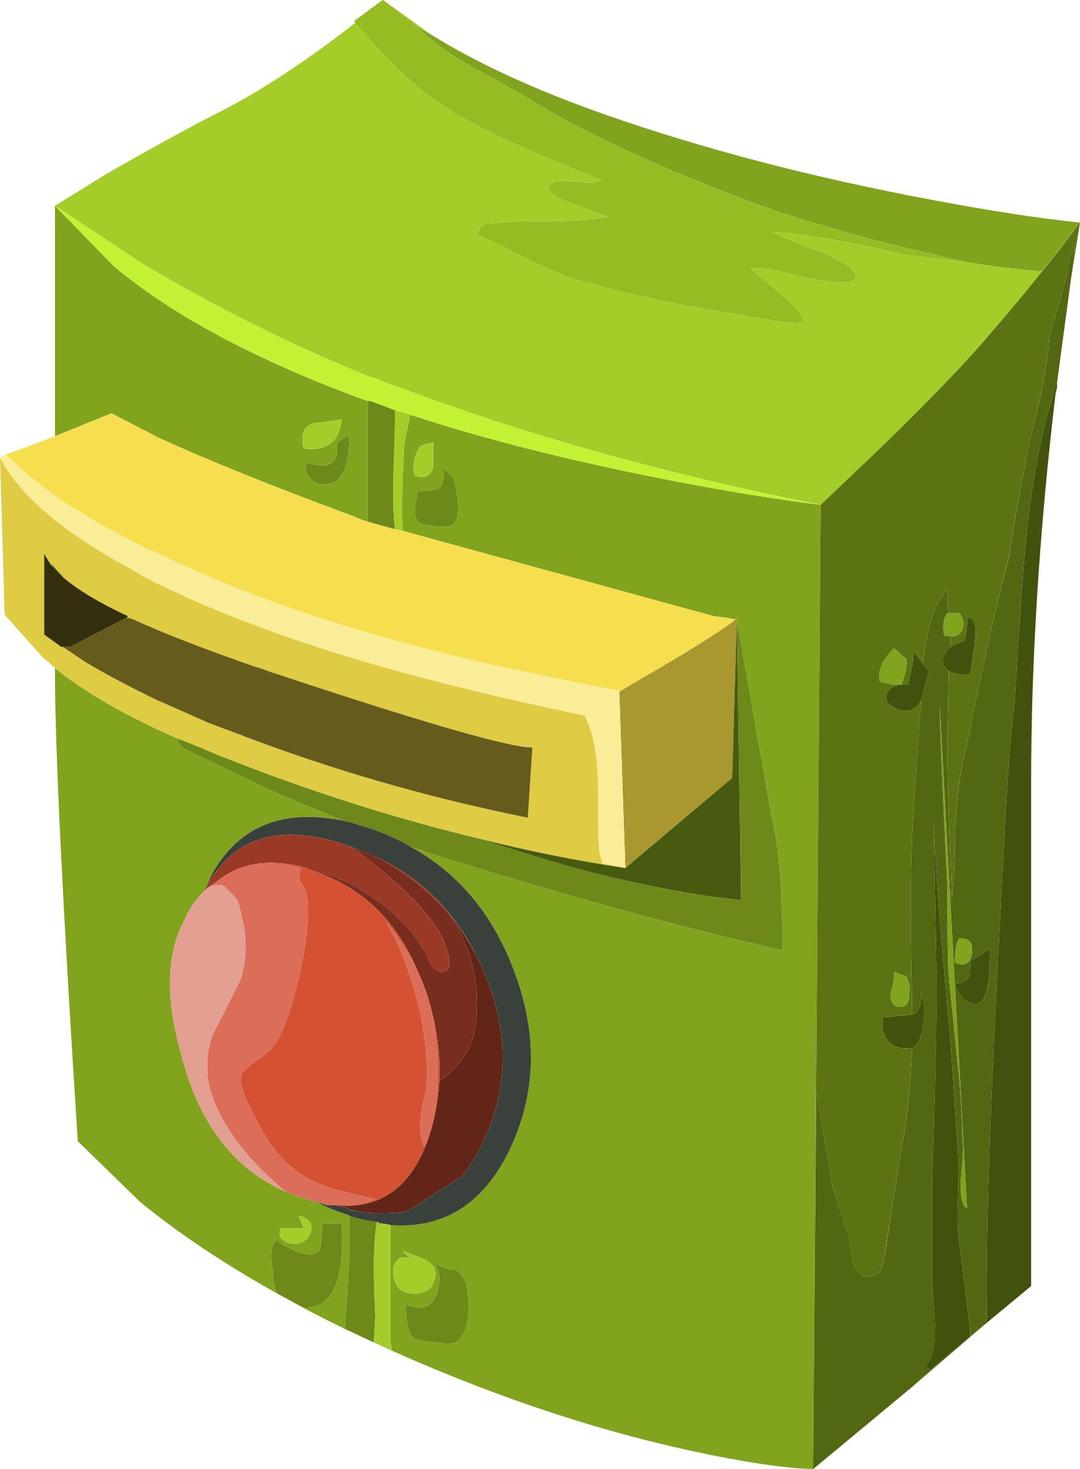 Misc Game Teleporter Coinbox png transparent